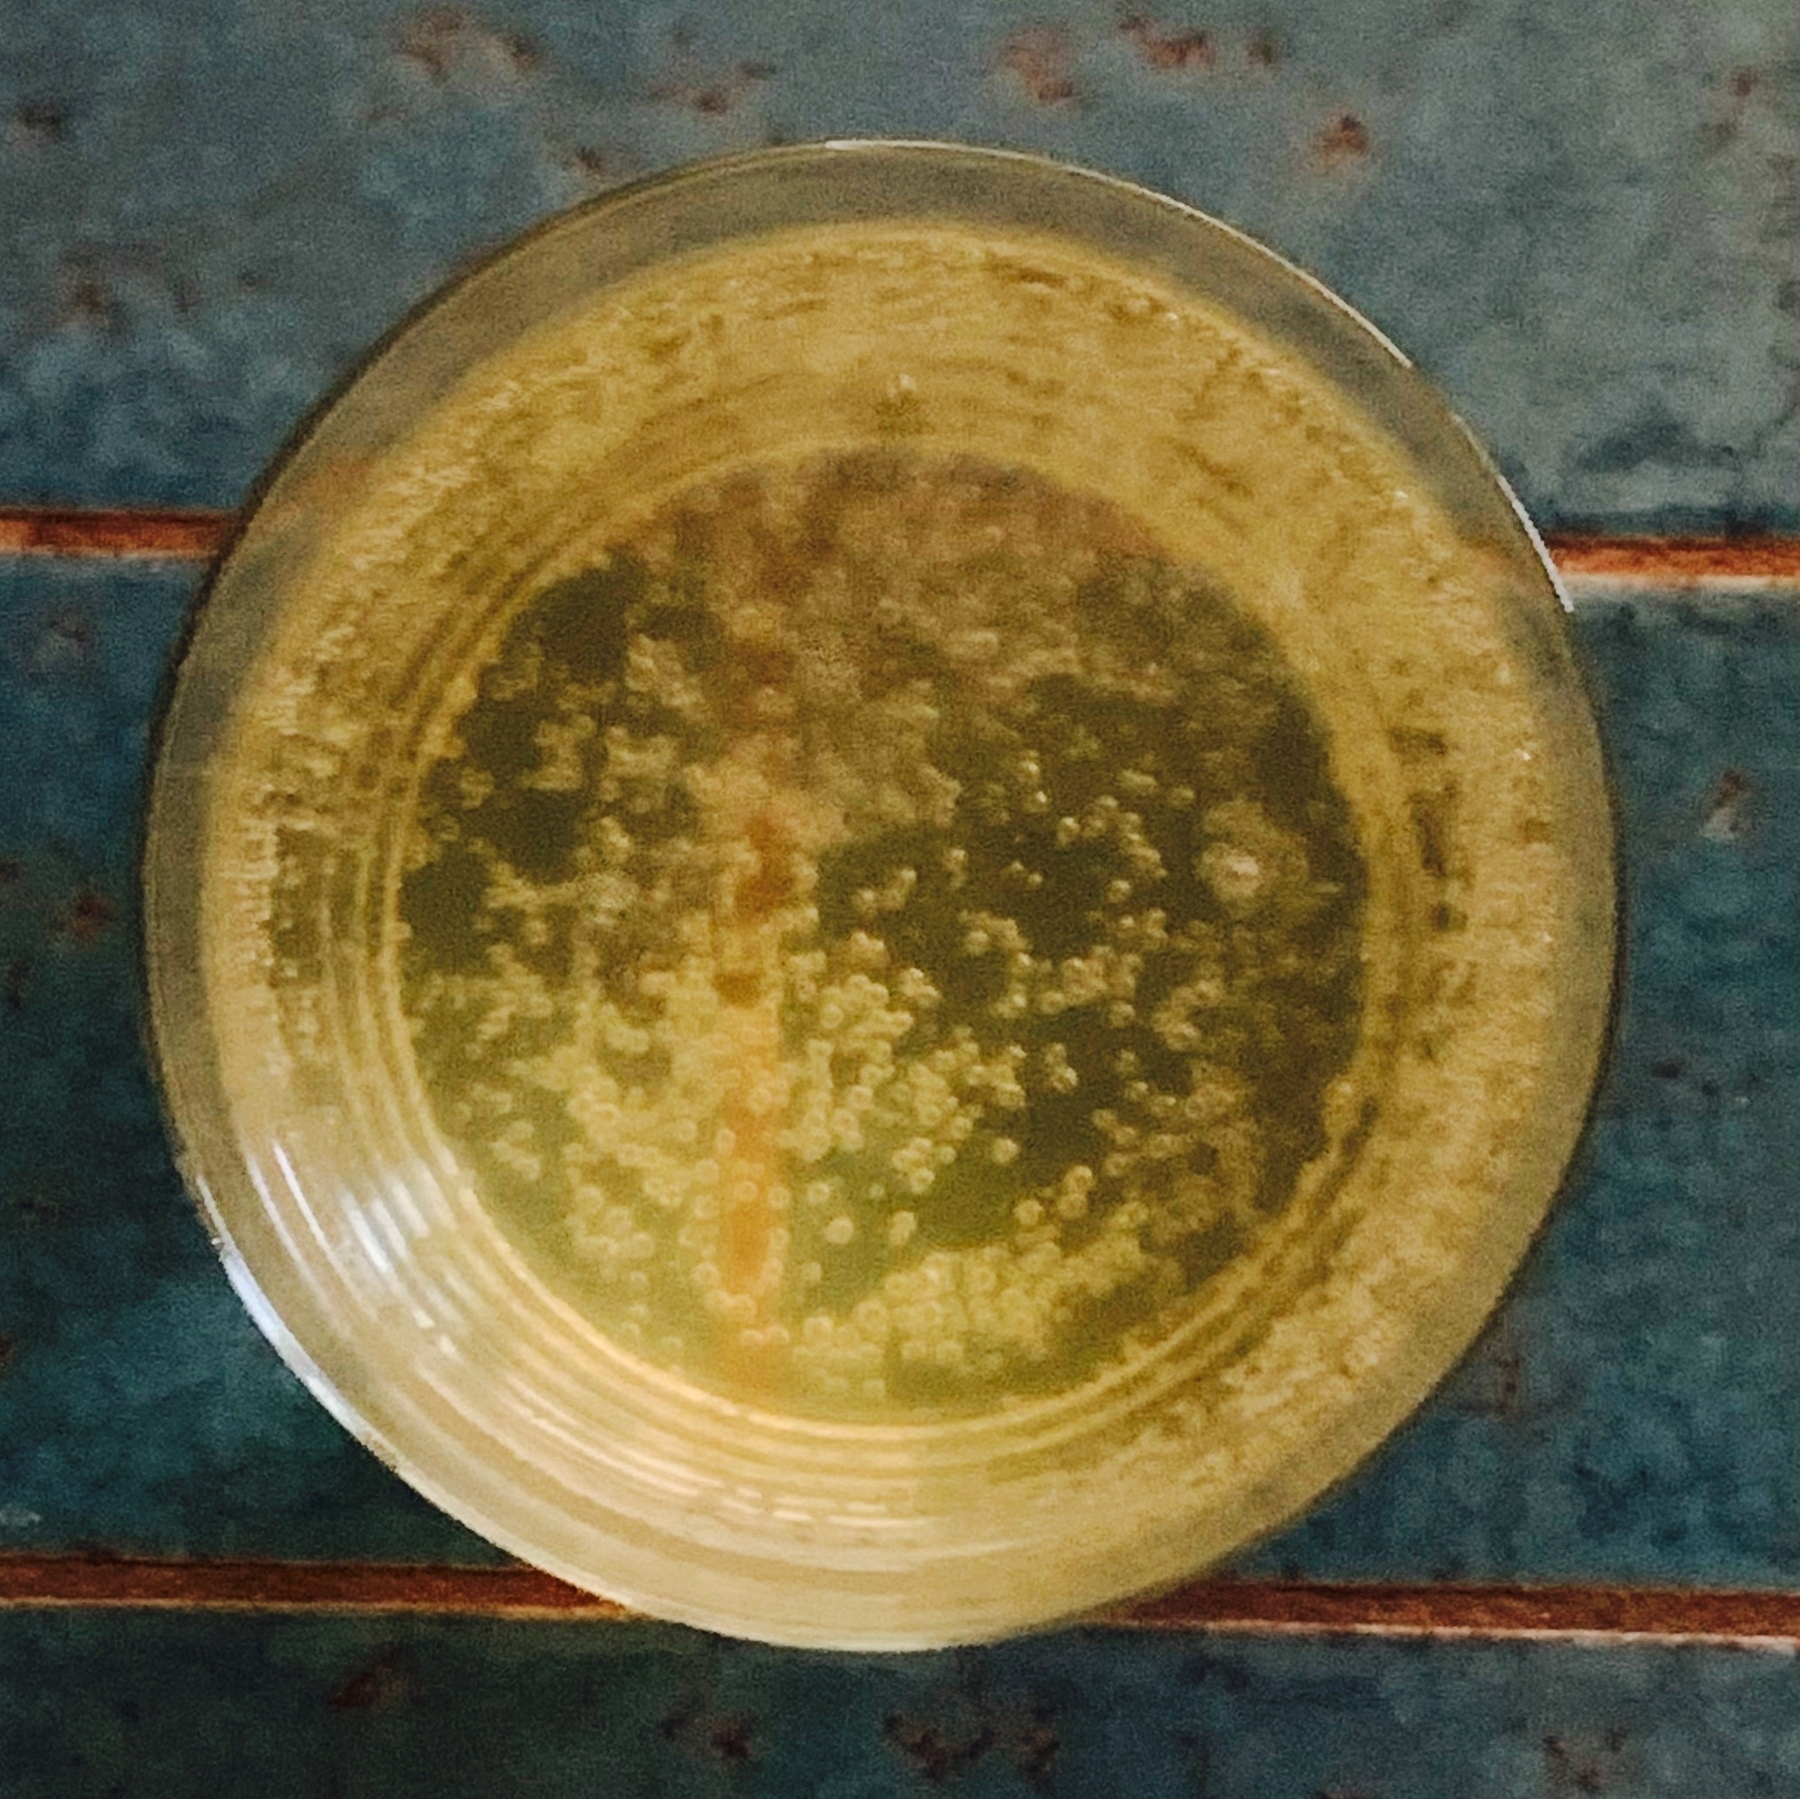 top down view of a glass of ginger ale